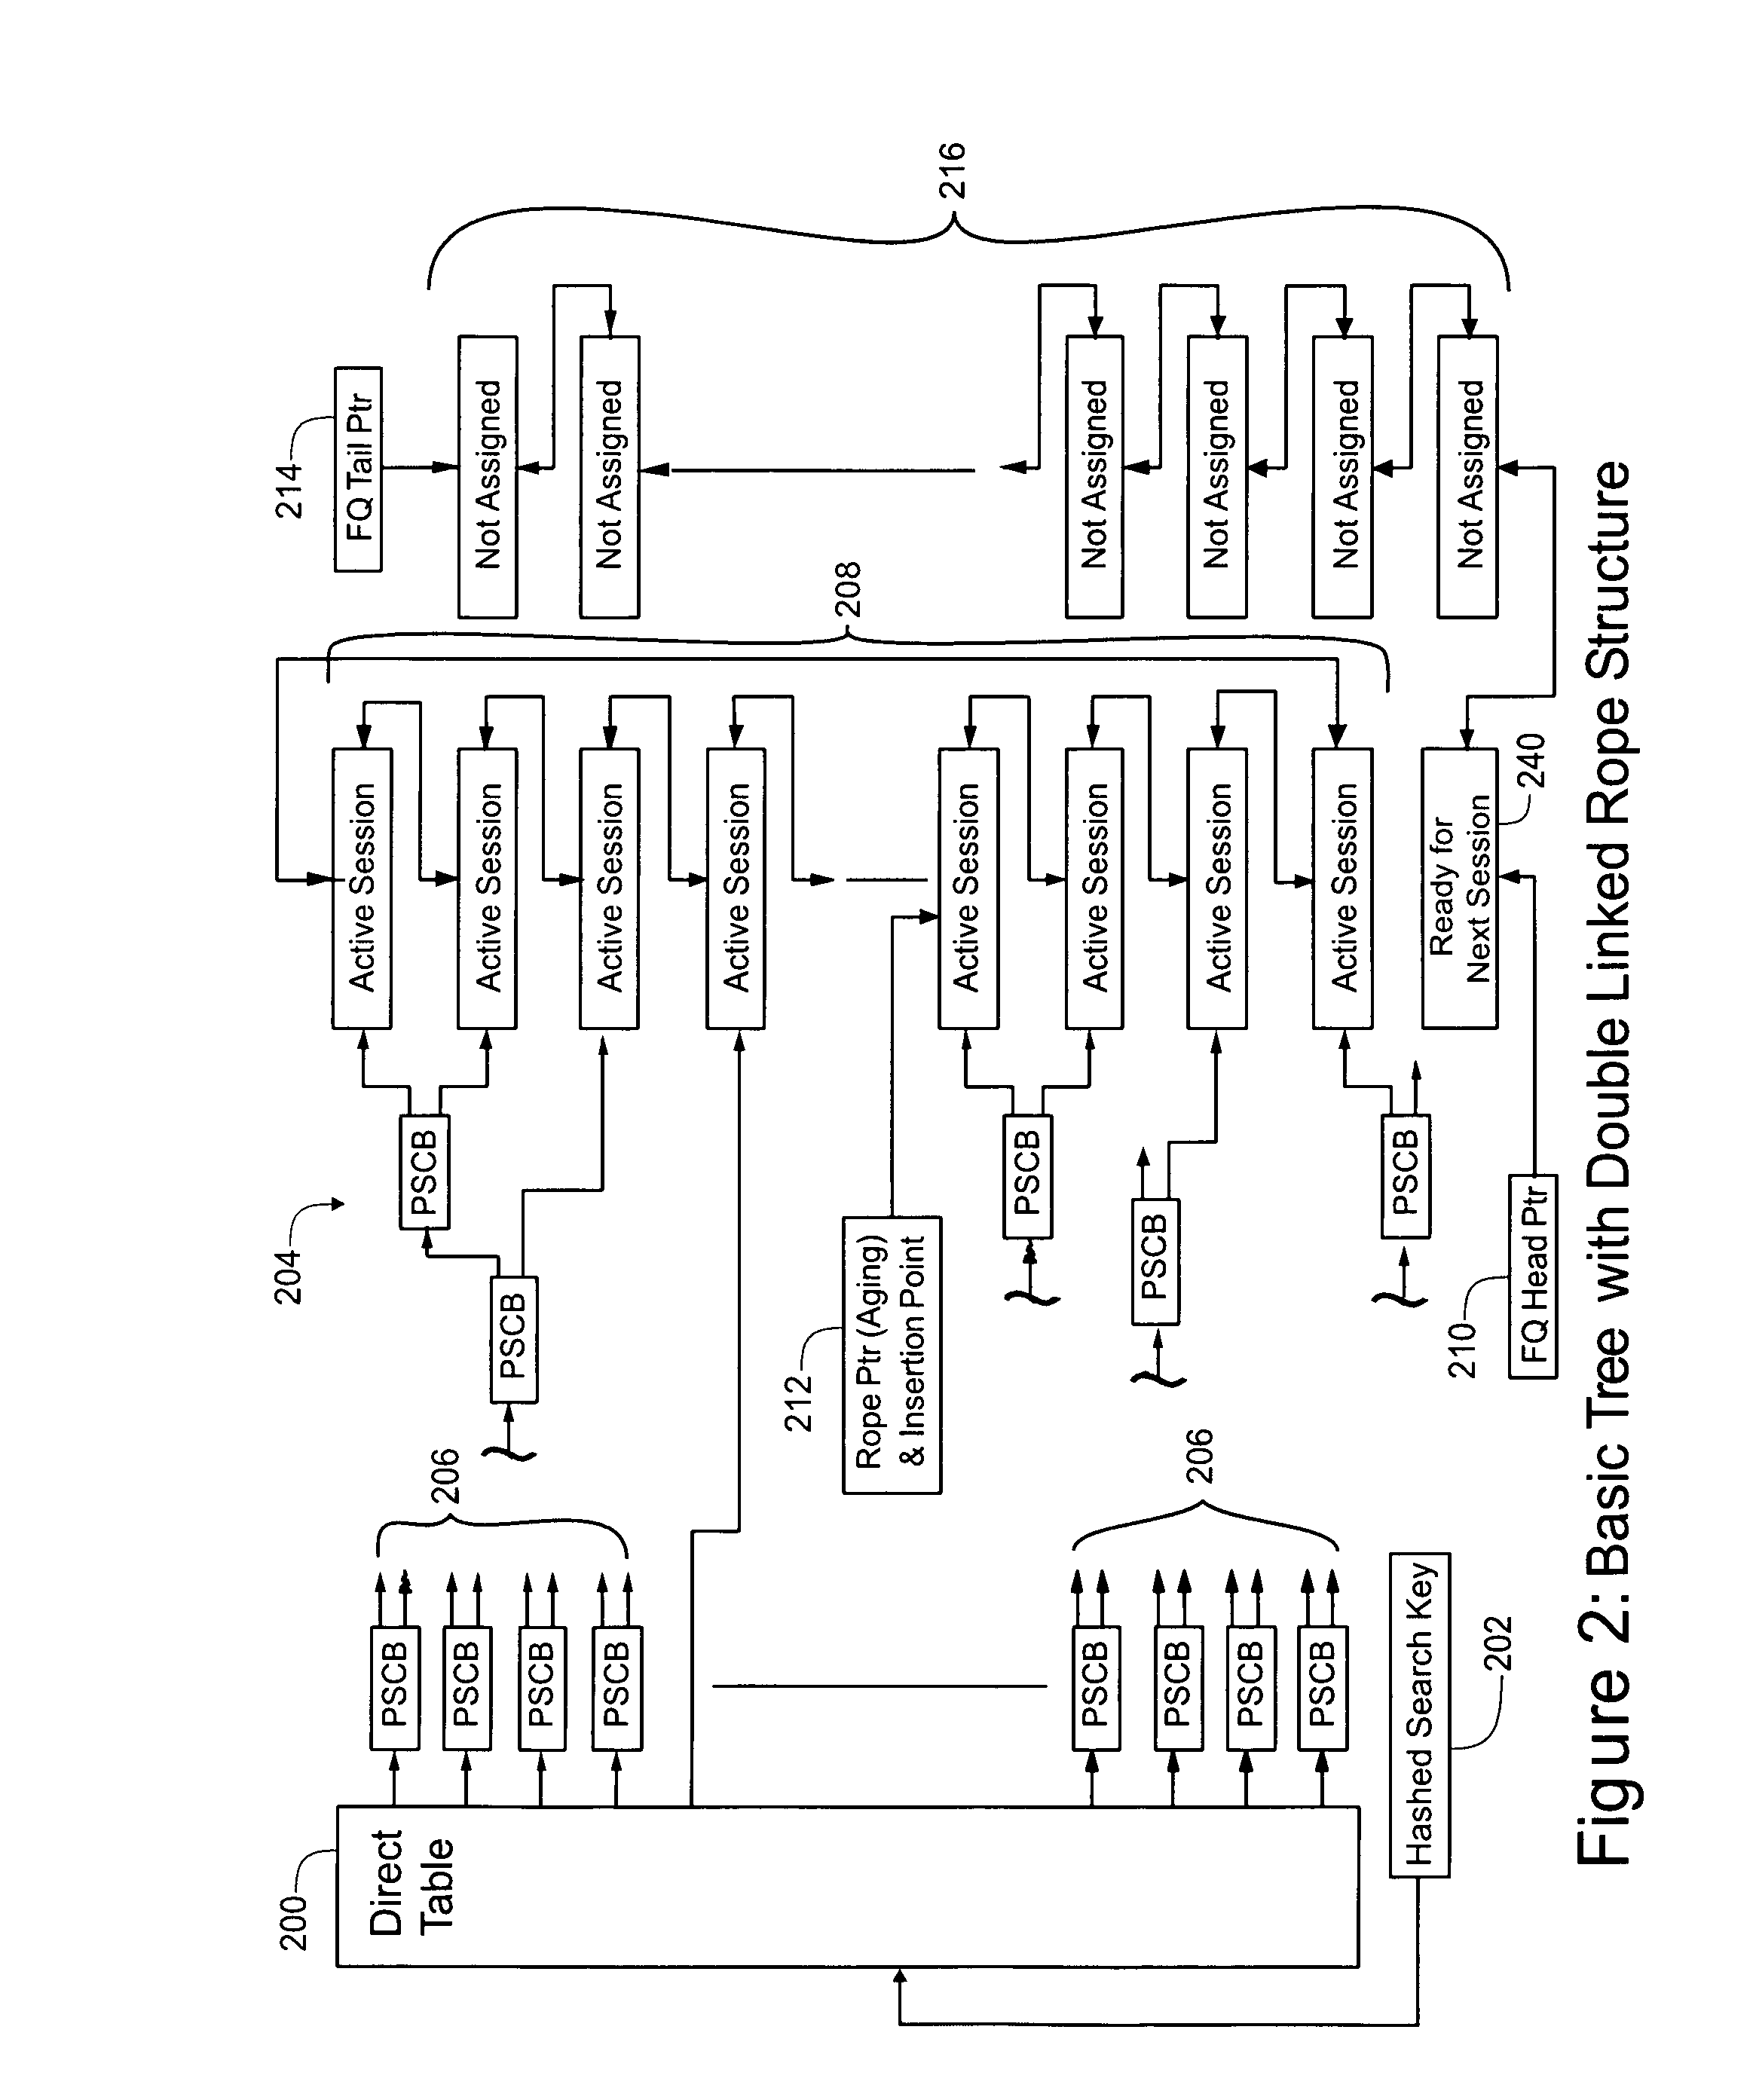 Data structure supporting random delete and timer function